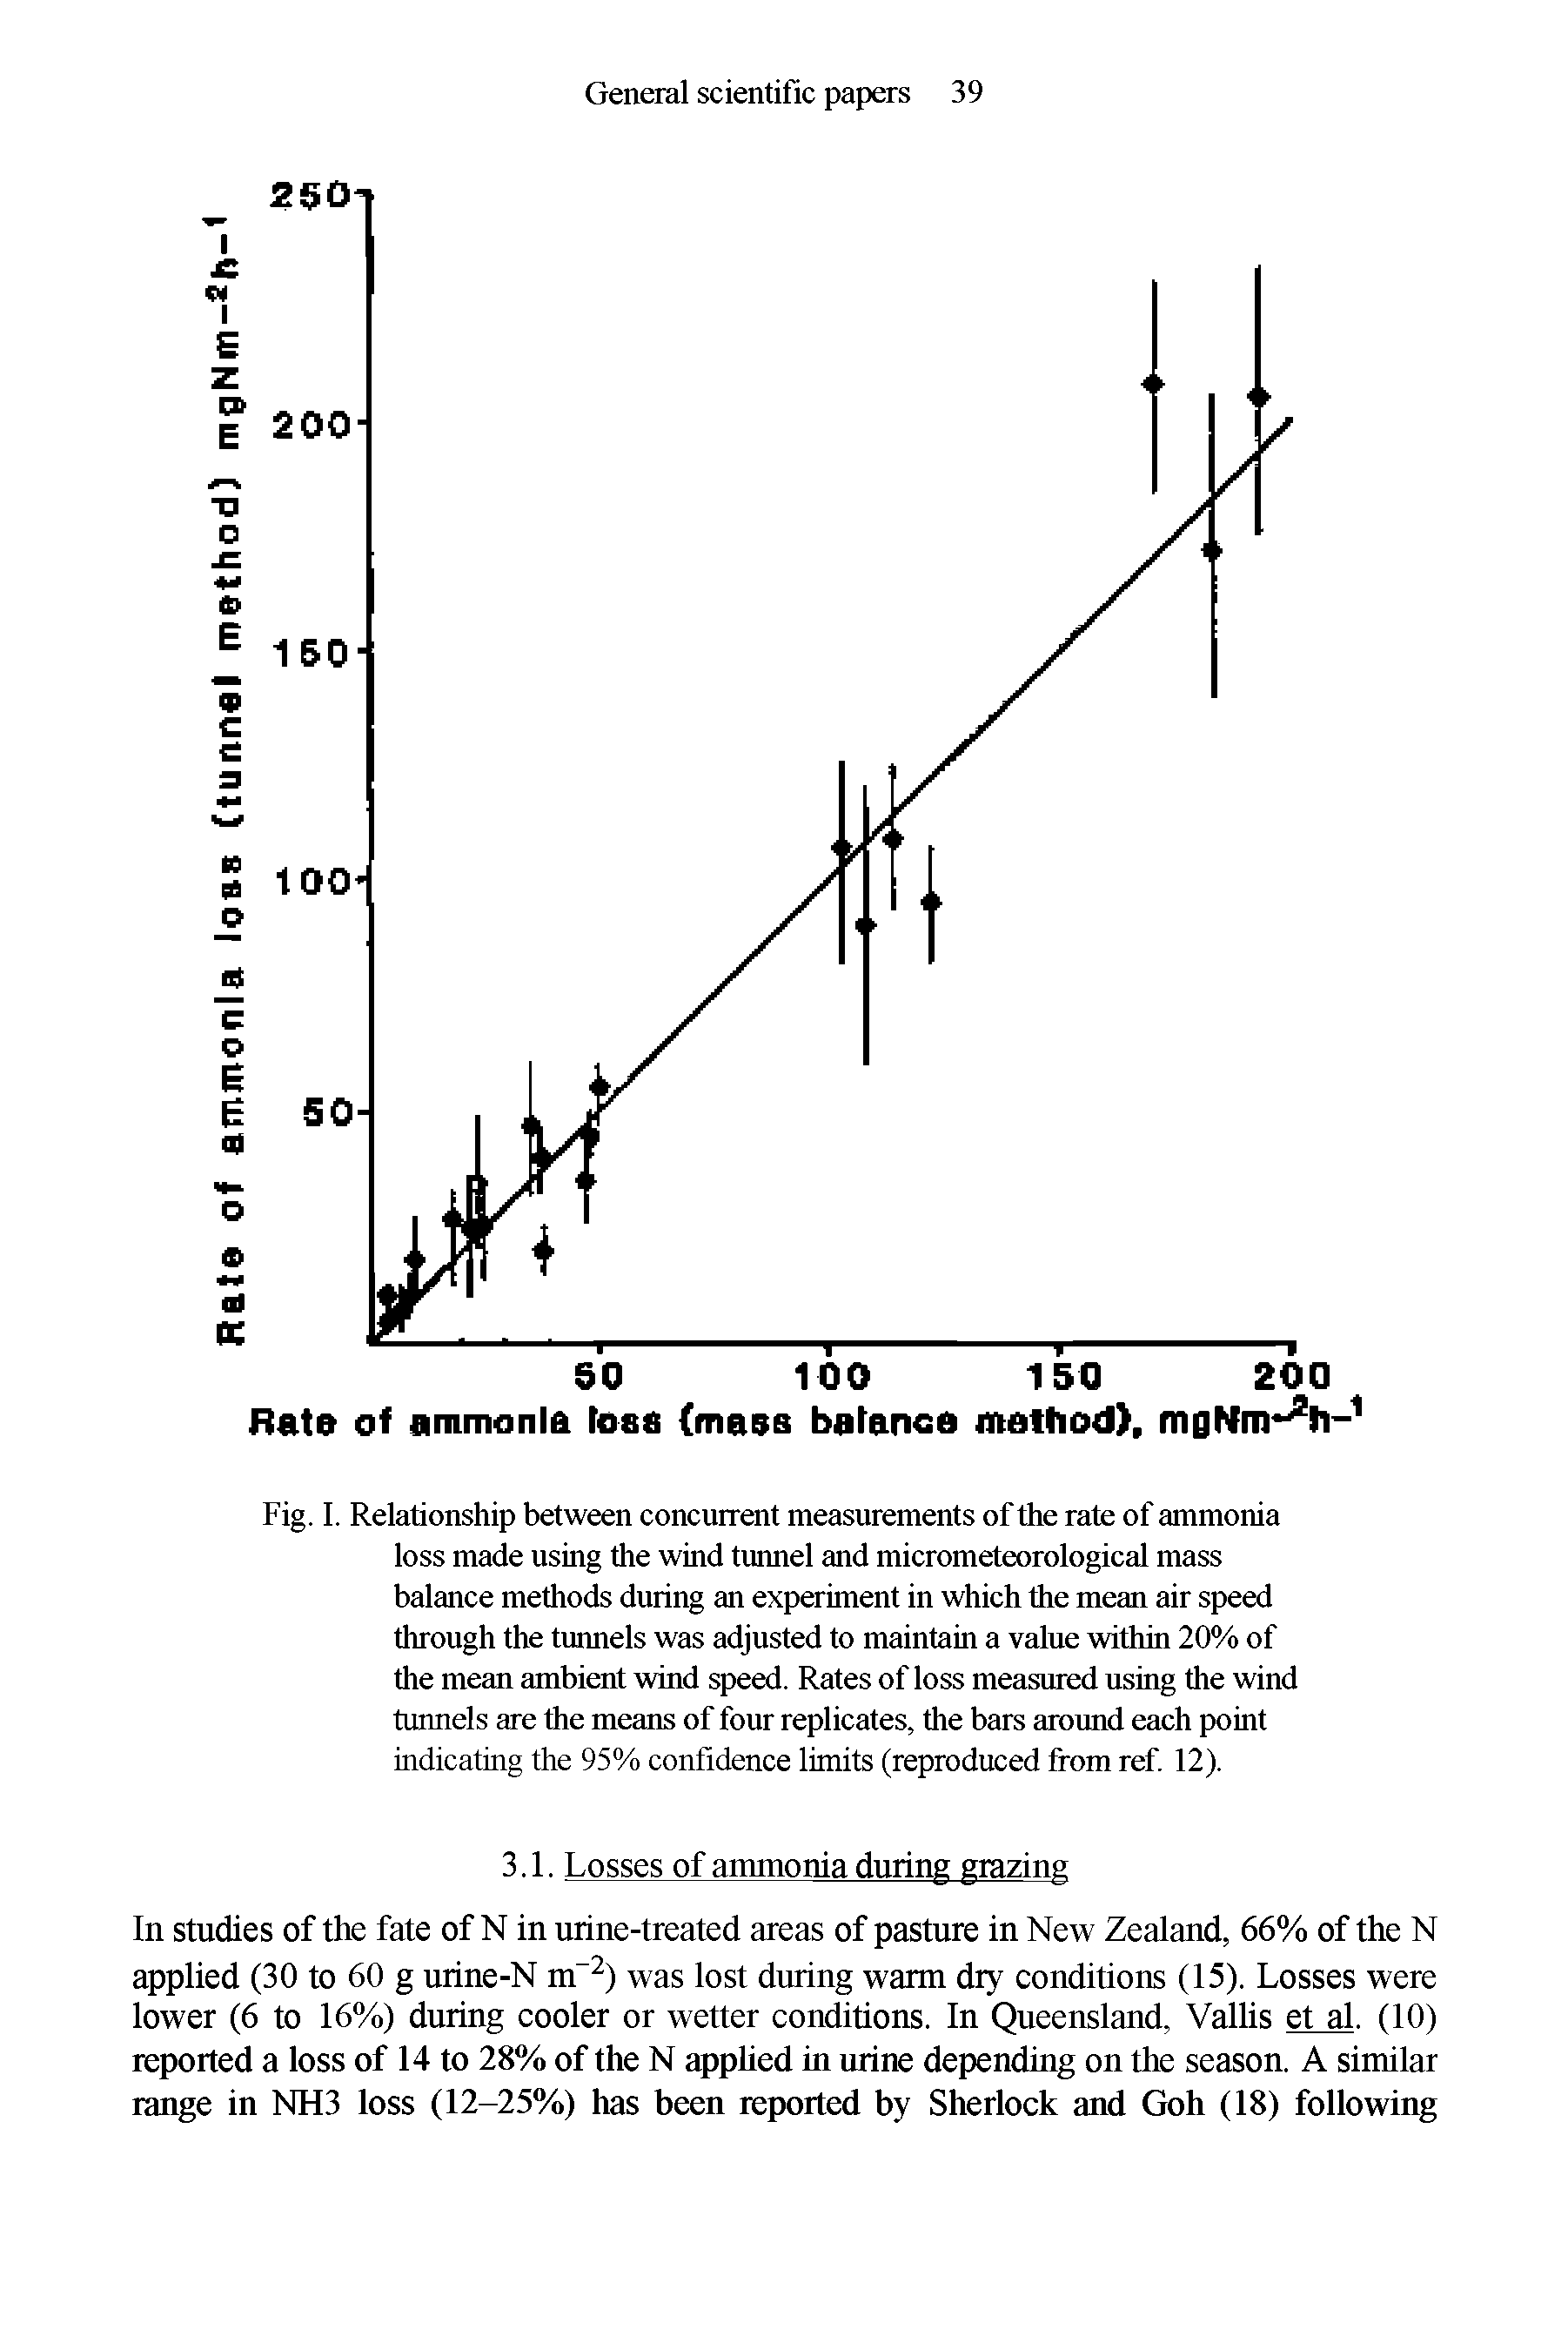 Fig. I. Relationship between concurrent measurements of the rate of ammonia loss made using the wind tunnel and micrometeorological mass balance methods during an experiment in which the mean air speed through the tunnels was adjusted to maintain a value within 20% of the mean ambient wind speed. Rates of loss measured using the wind tunnels are the means of four replicates, the bars around each point indicating the 95% confidence limits (reproduced from ref. 12).